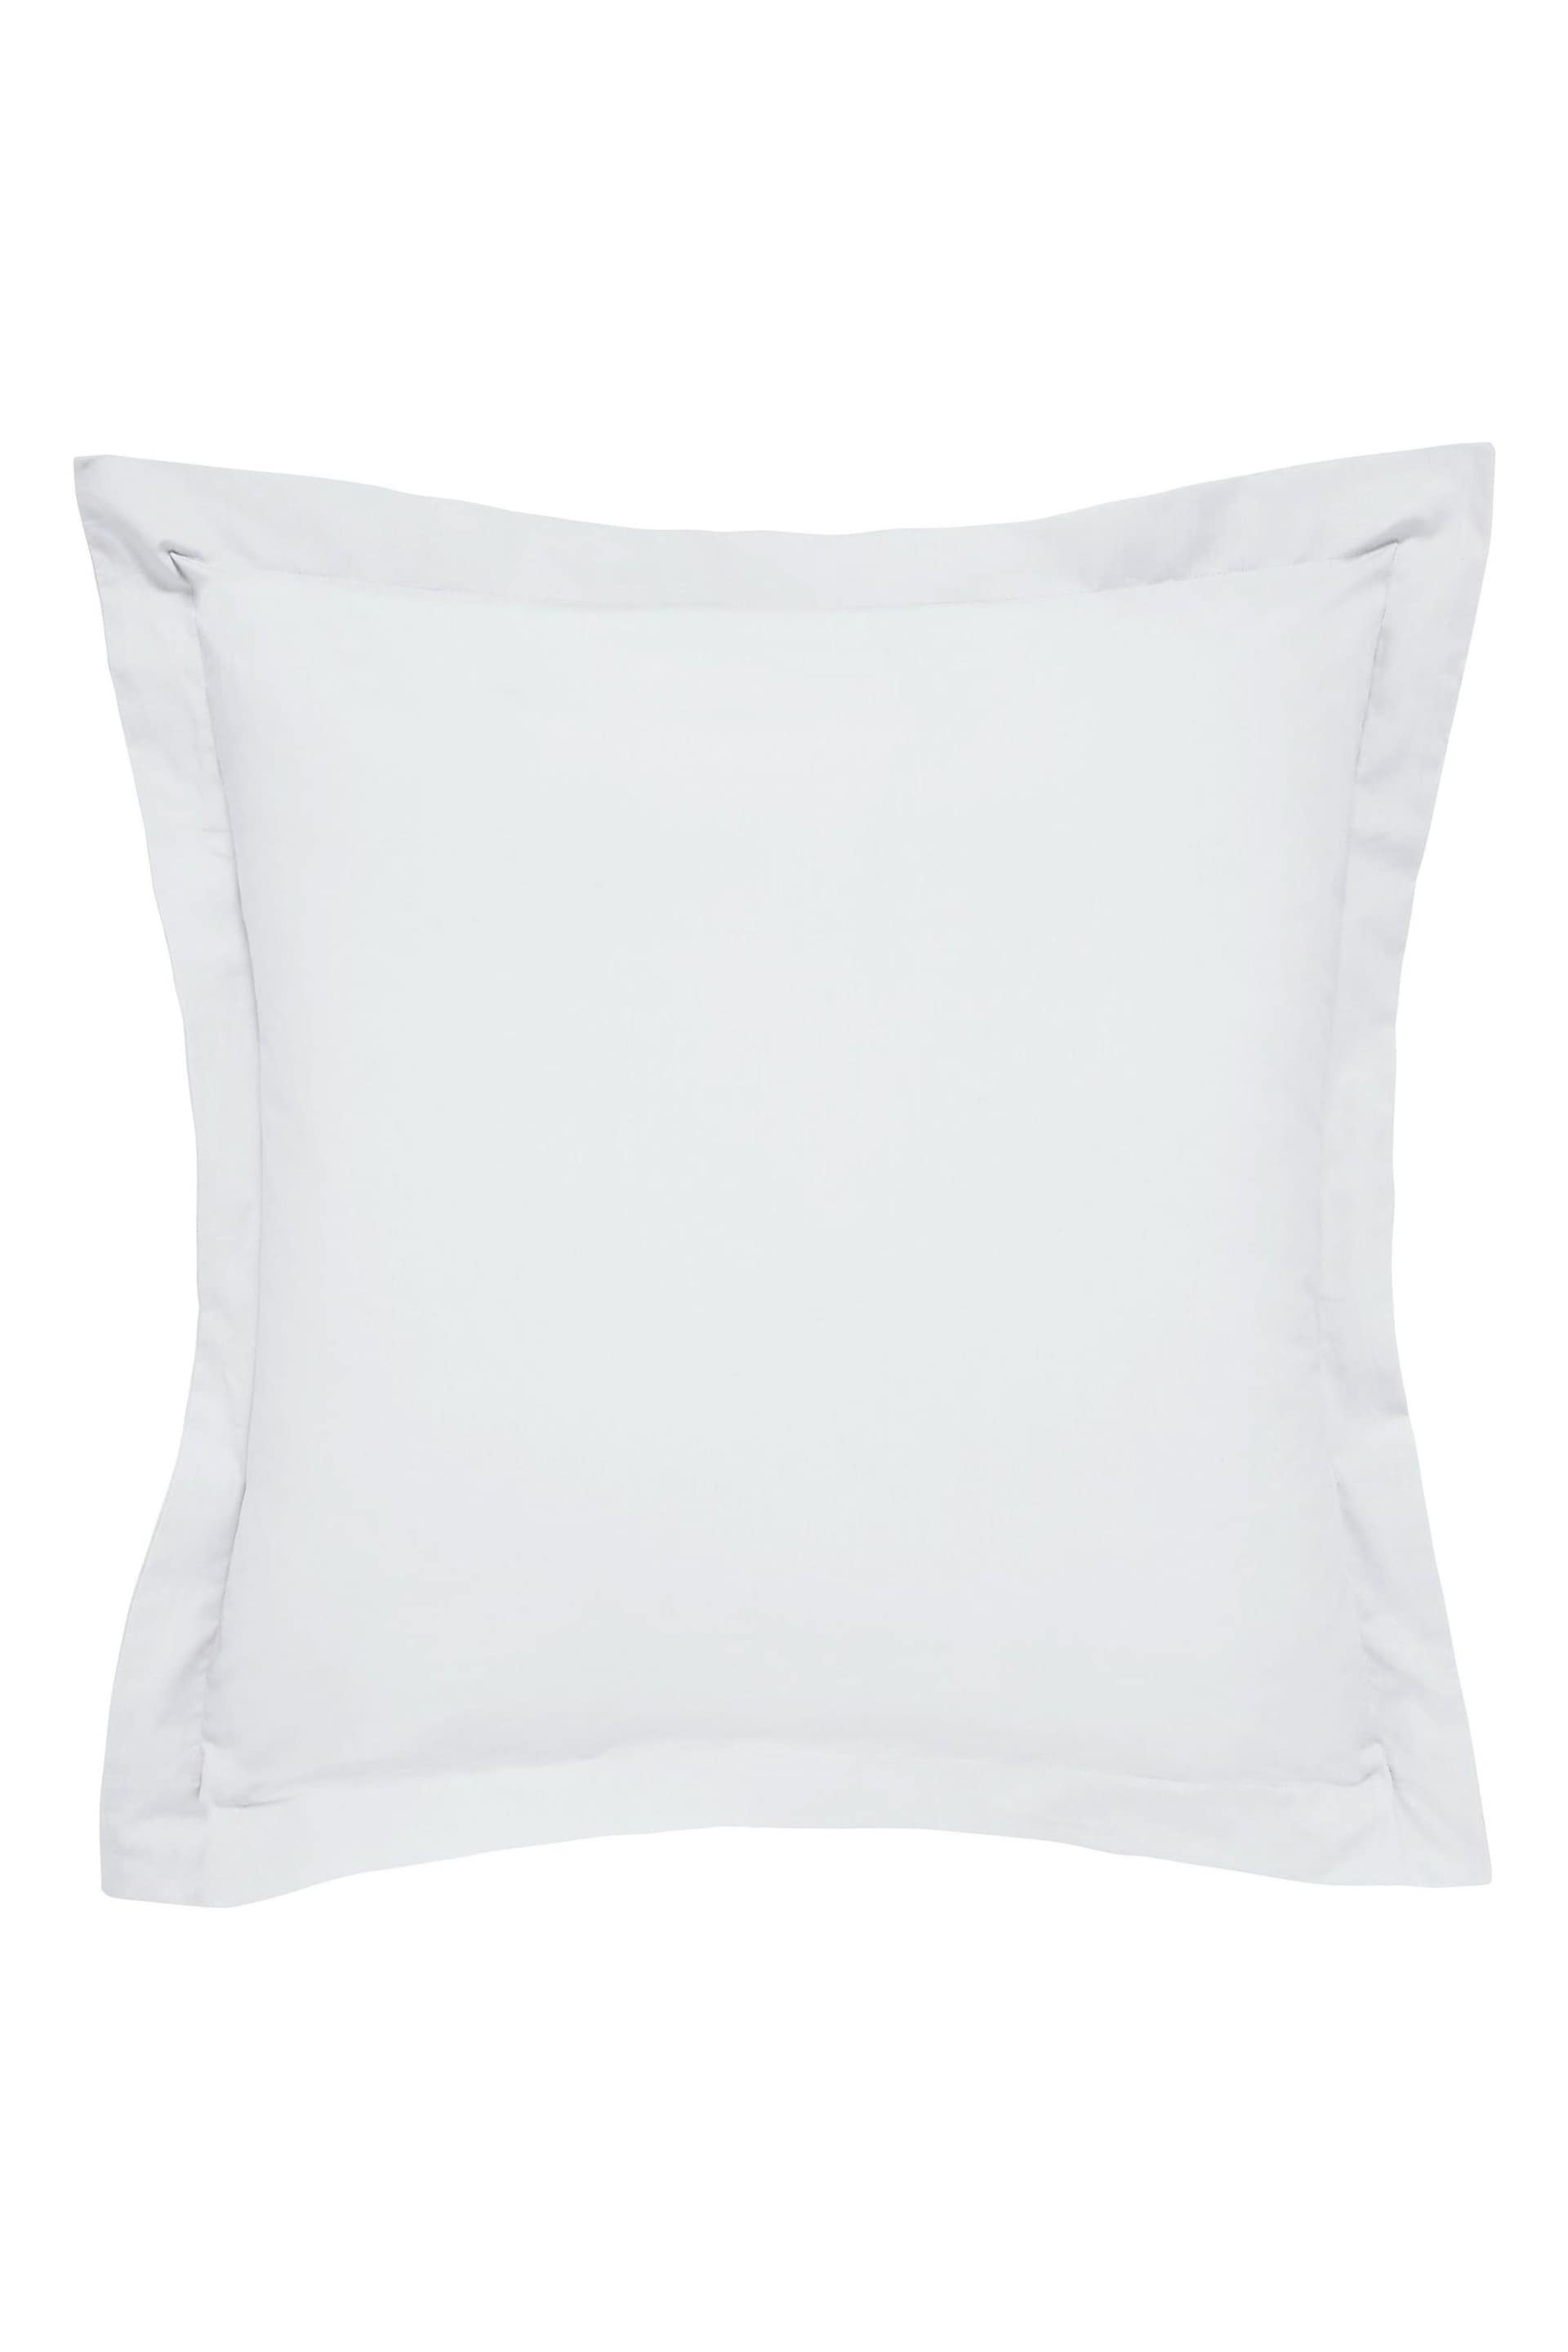 Bedeck of Belfast White 300 Thread Count Square Pillowcase - Image 2 of 2